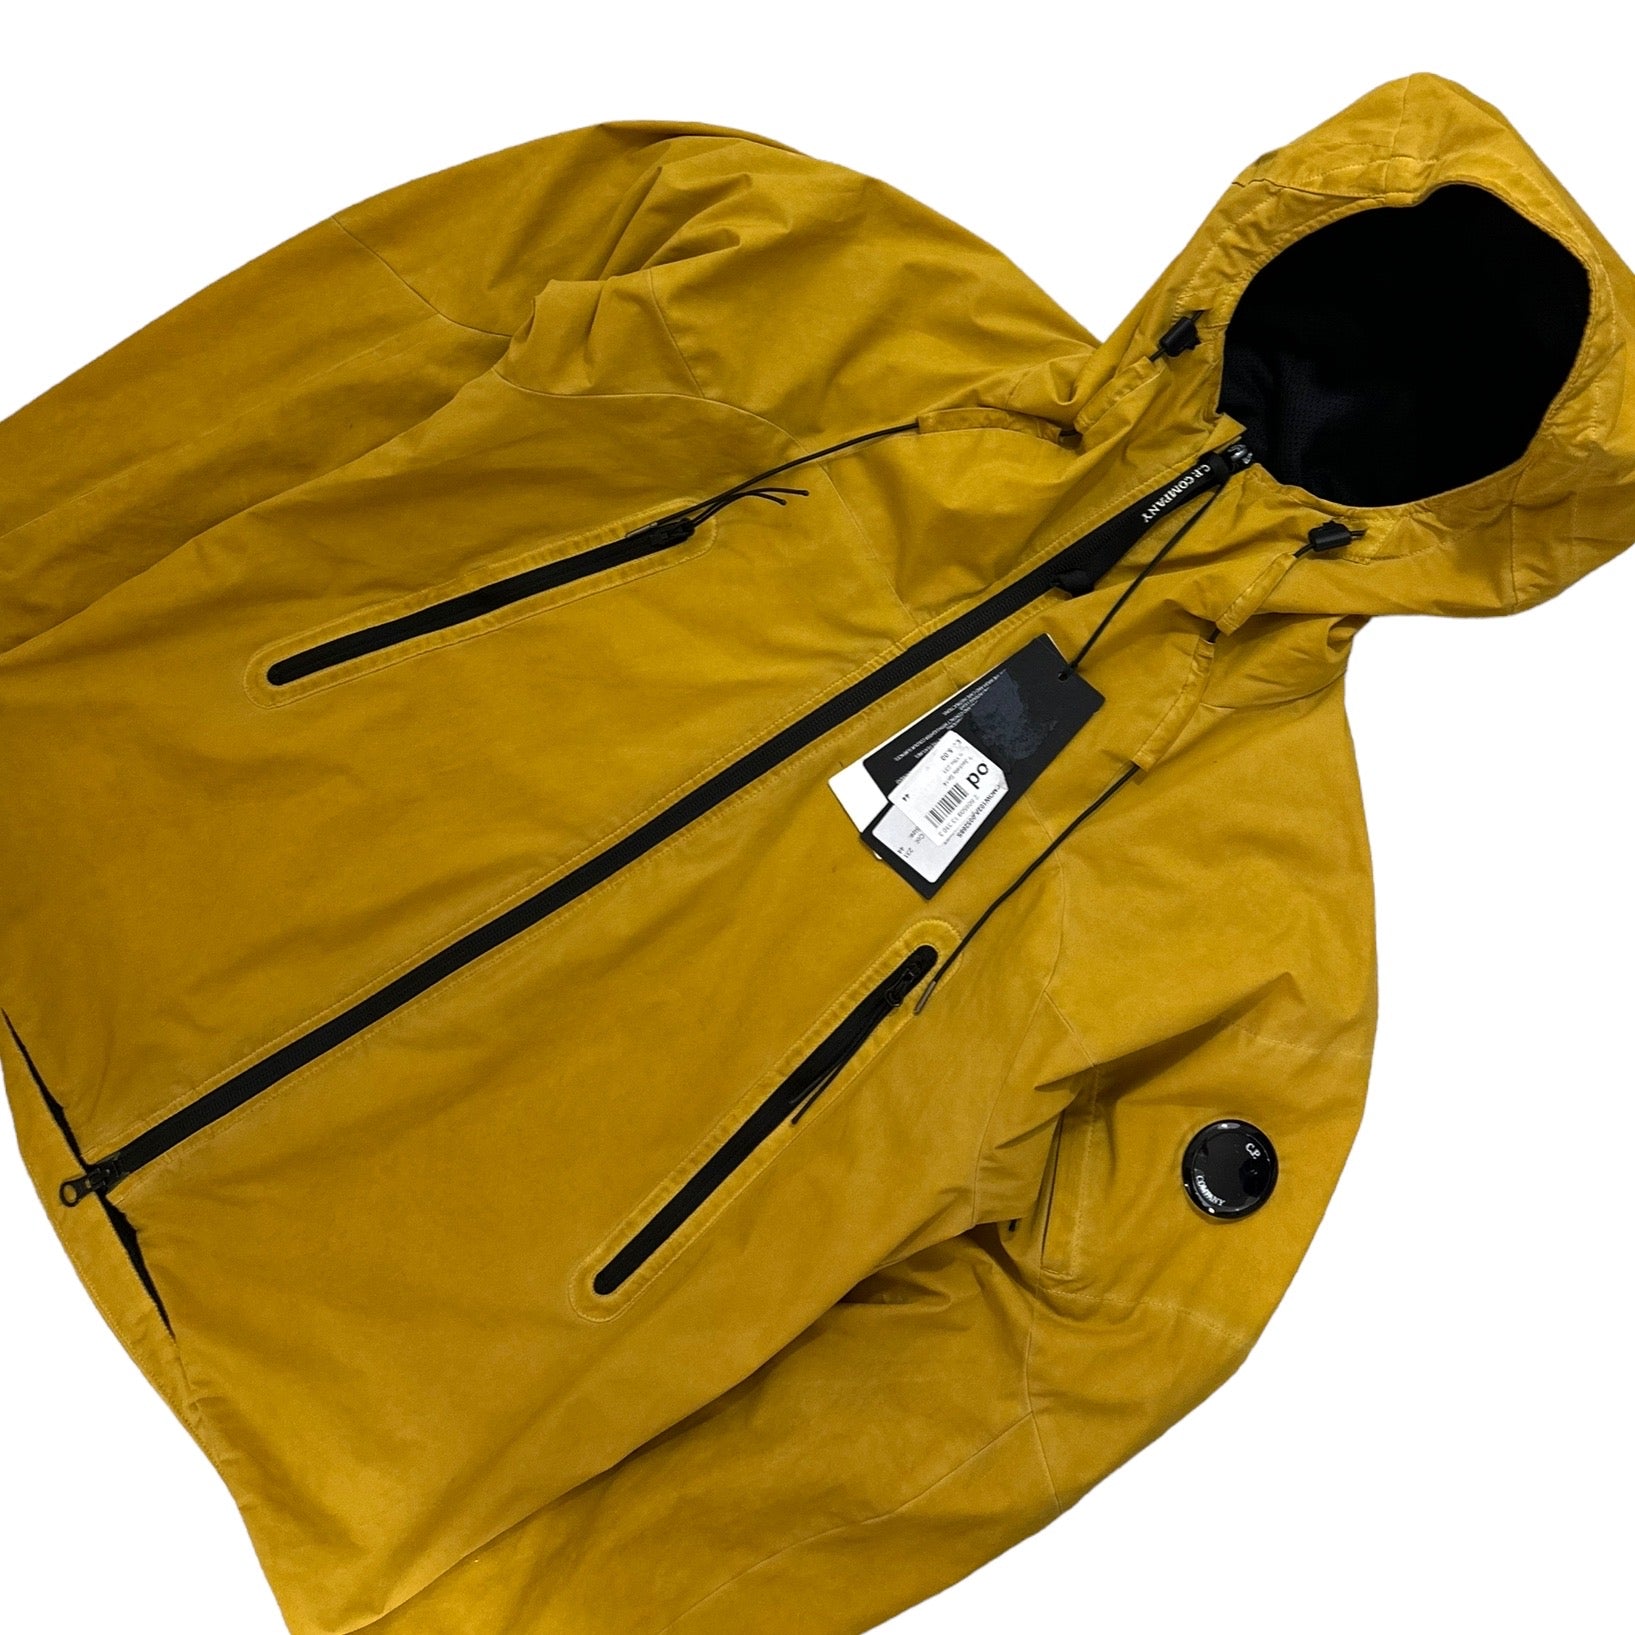 CP Company Recolour Pro Tek Jacket with Micro Lens